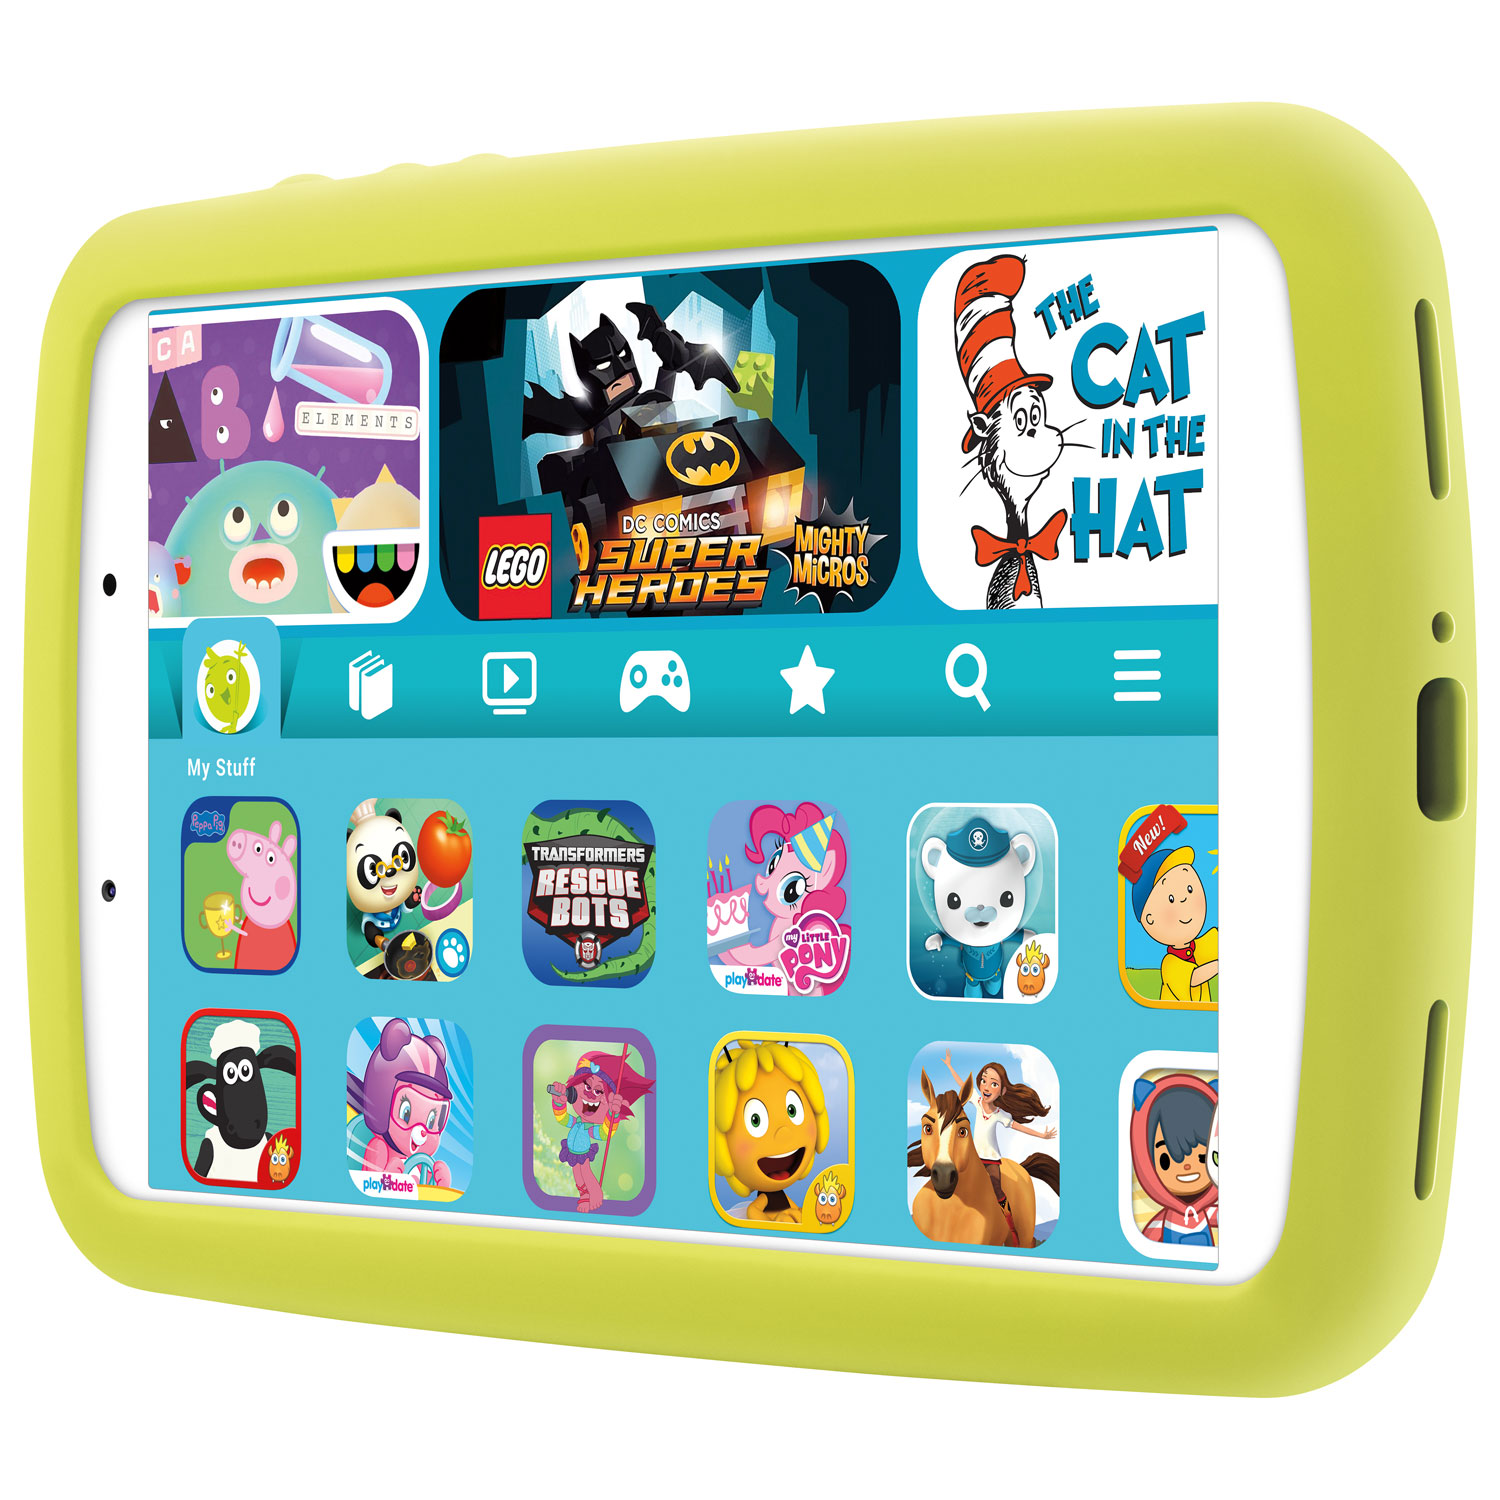 Samsung Galaxy Tab A Kids Edition 8 32gb Android Tablet With Quad Core Processor Green Best Buy Canada - details about roblox 7 universal tablet wallet case for mini ipadgalaxy tab7 more